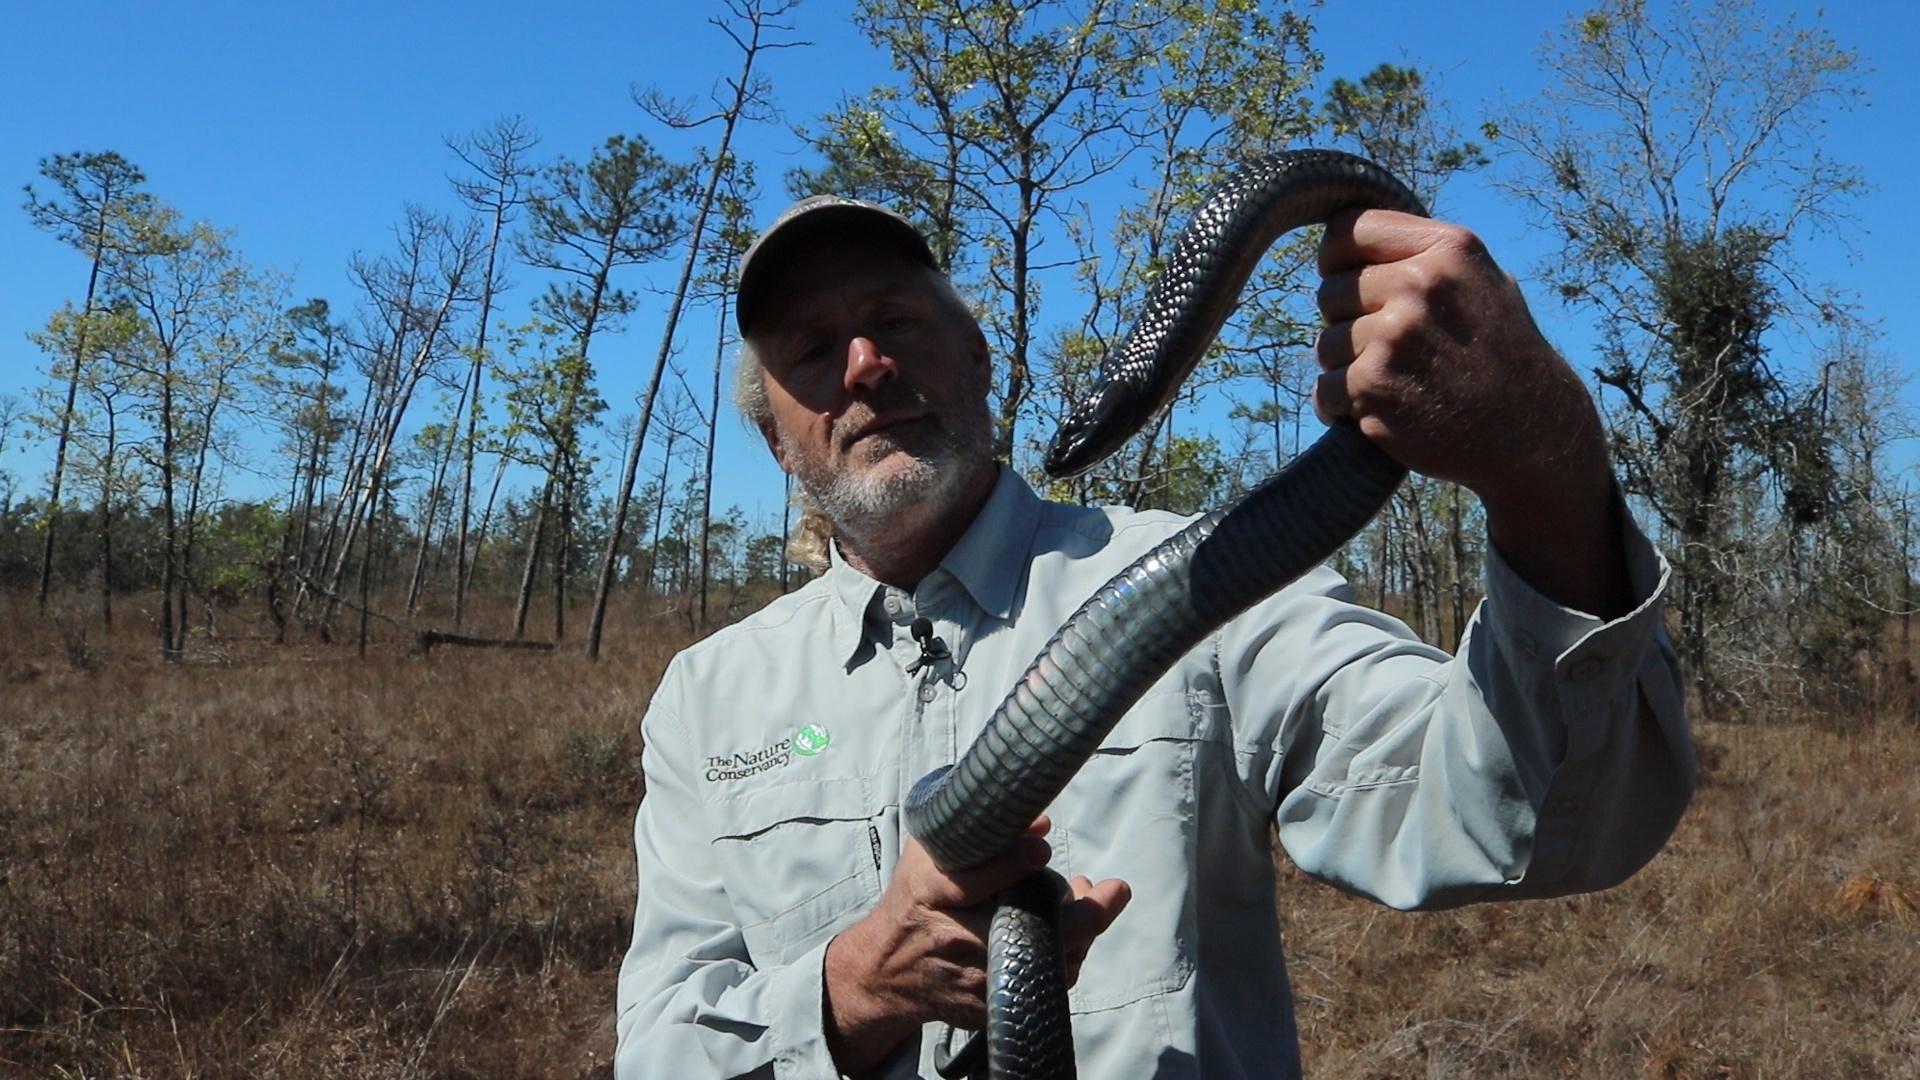 Indigo Snakes in the Apalachicola Bluffs and Ravines